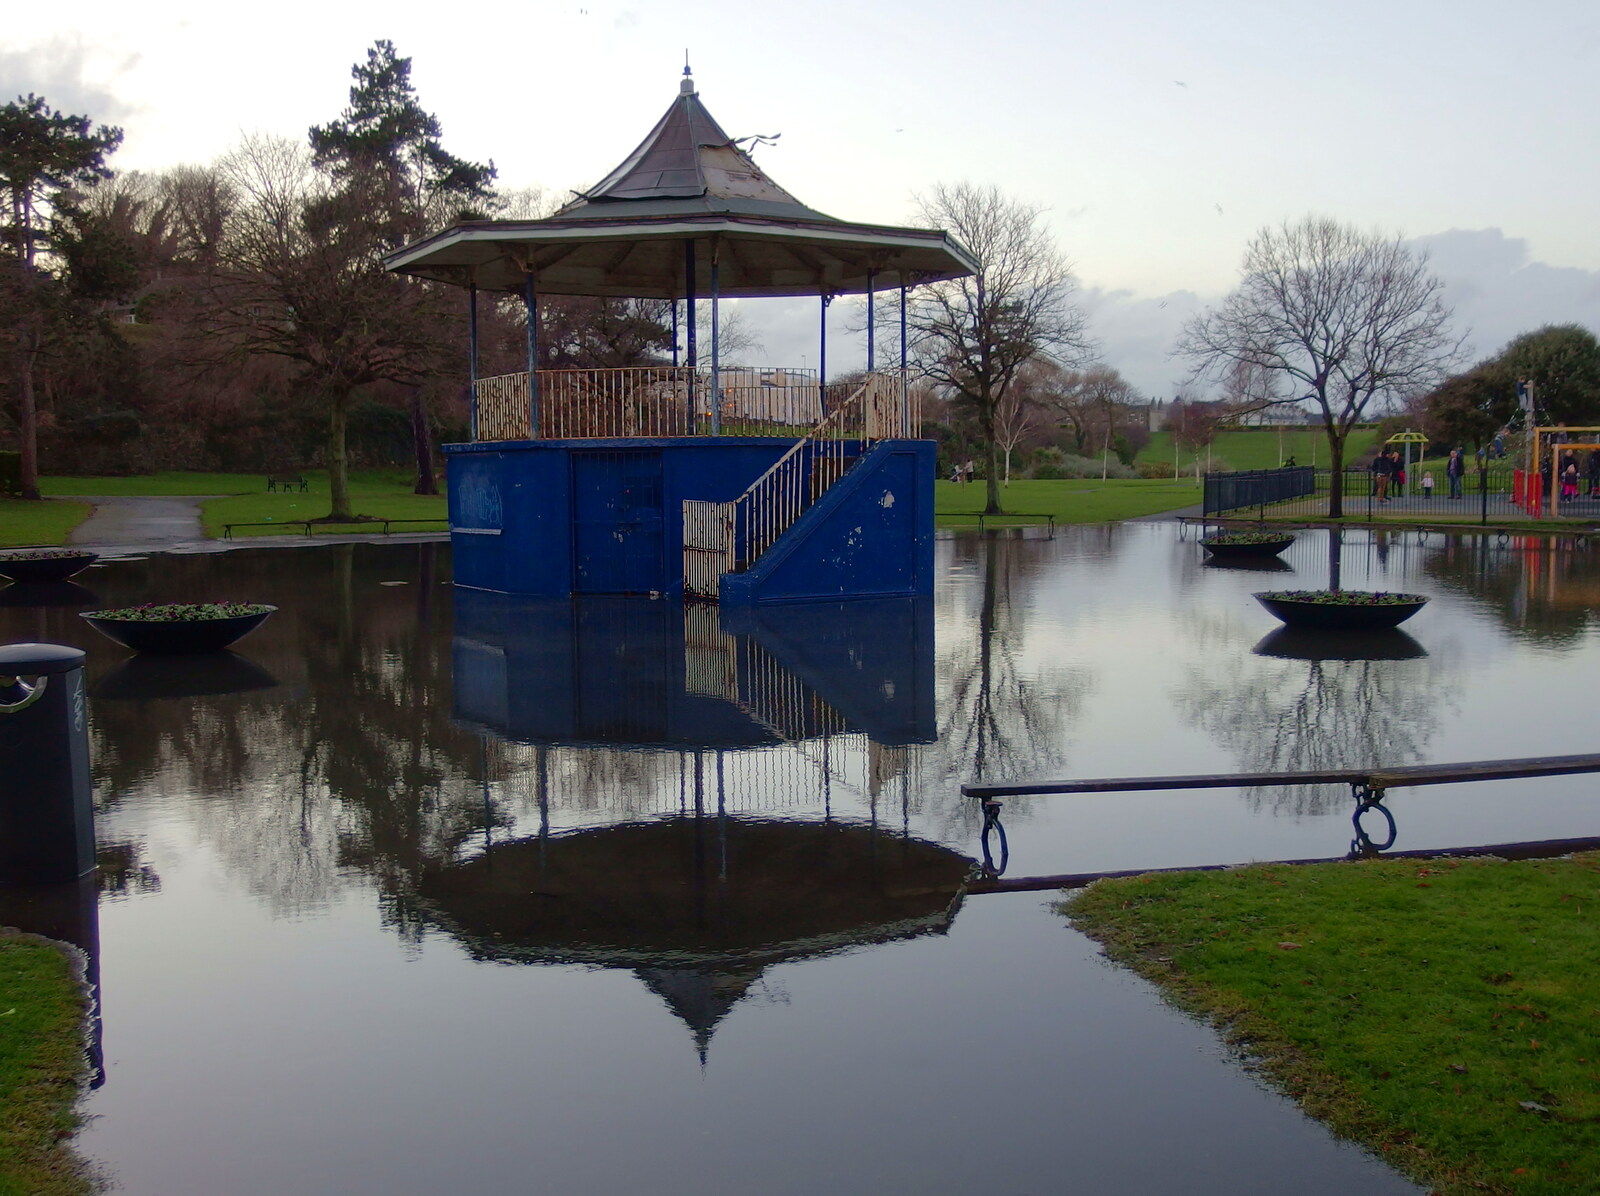 Back to the flooded bandstand in the park from Dun Laoghaire and an Electrical Disaster, Monkstown, County Dublin, Ireland - 4th January 2014